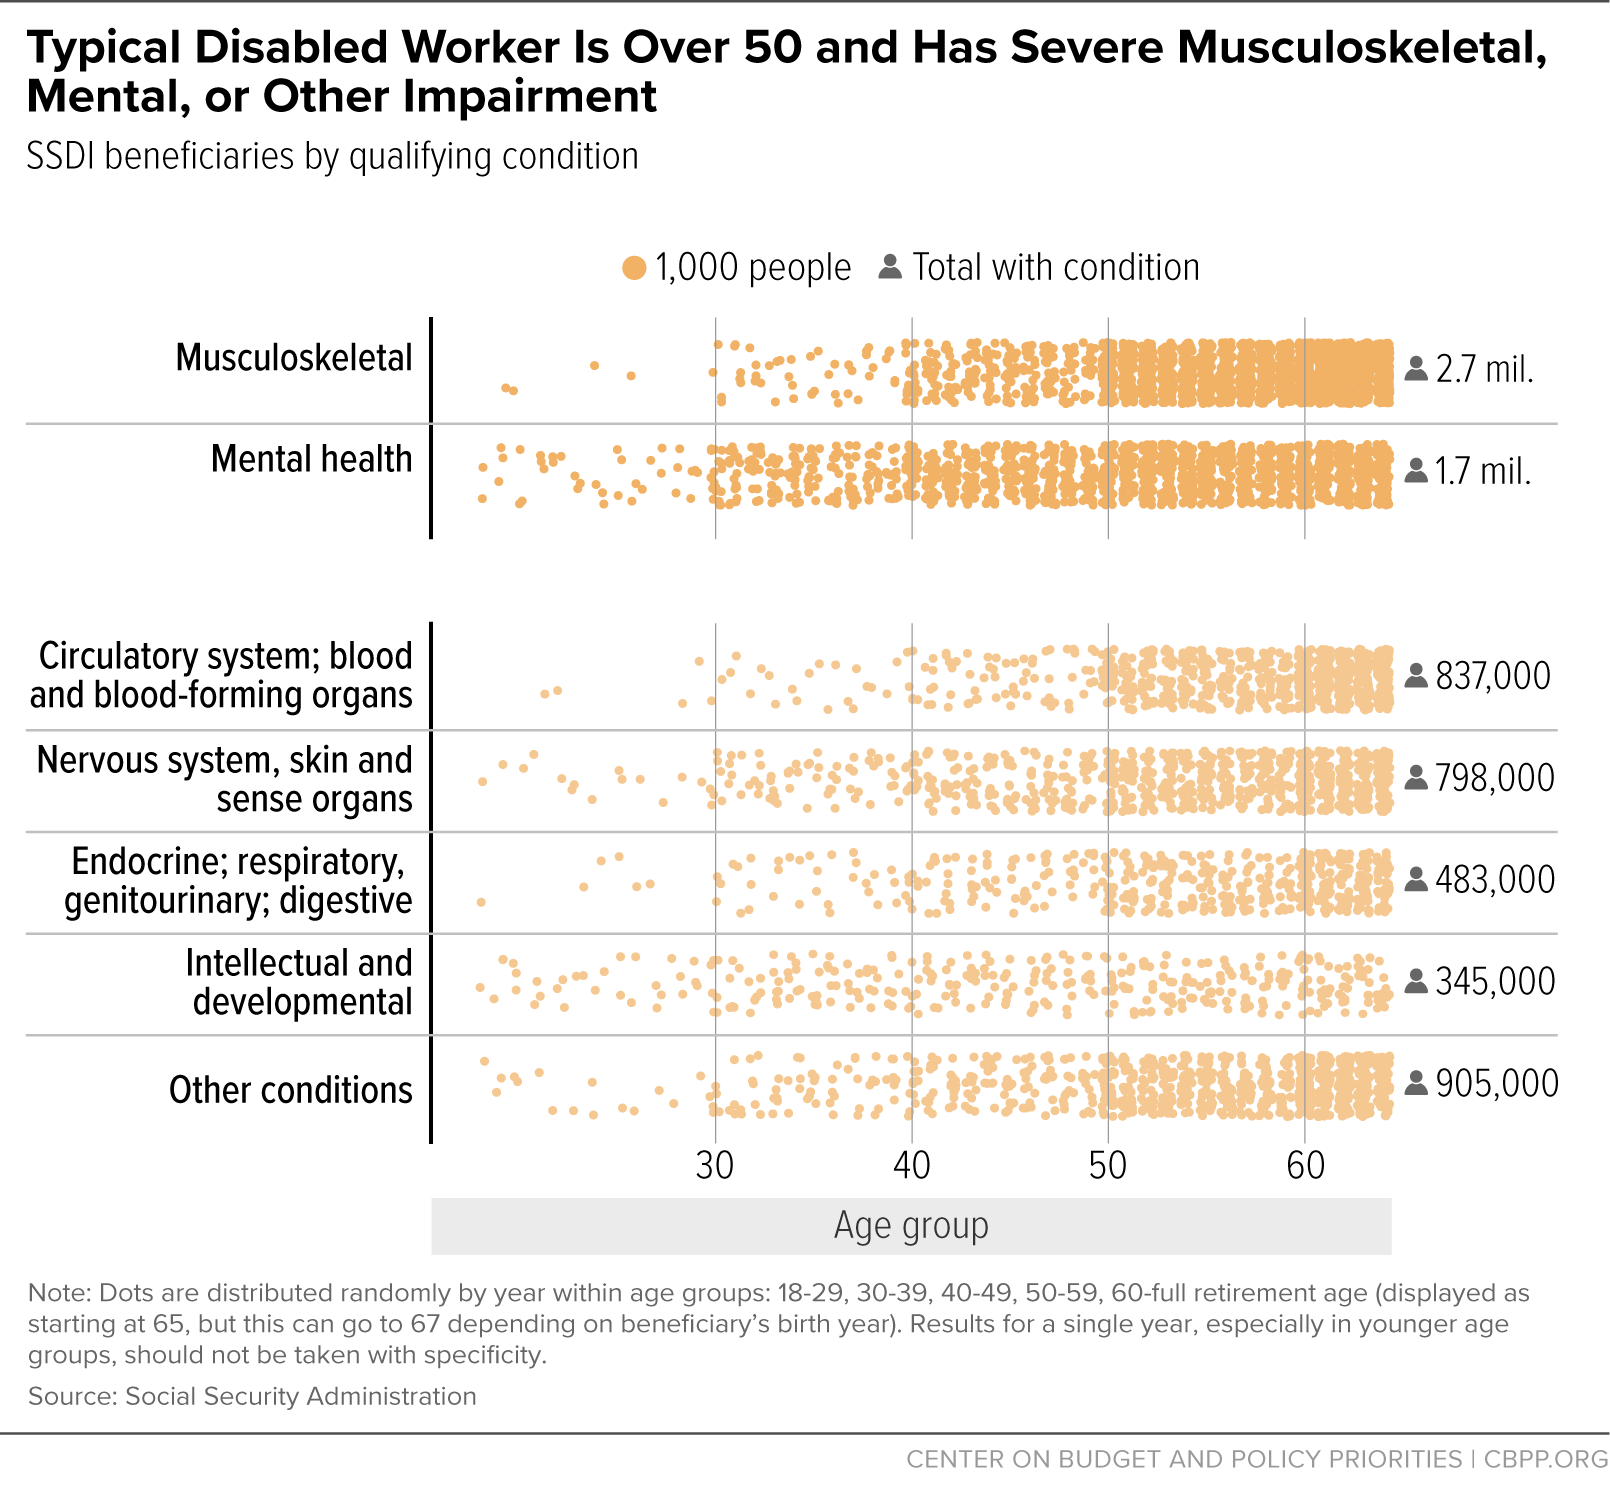 Typical Disabled Worker Is Over 50 and Has Severe Musculoskeletal, Mental, or Other Impairment